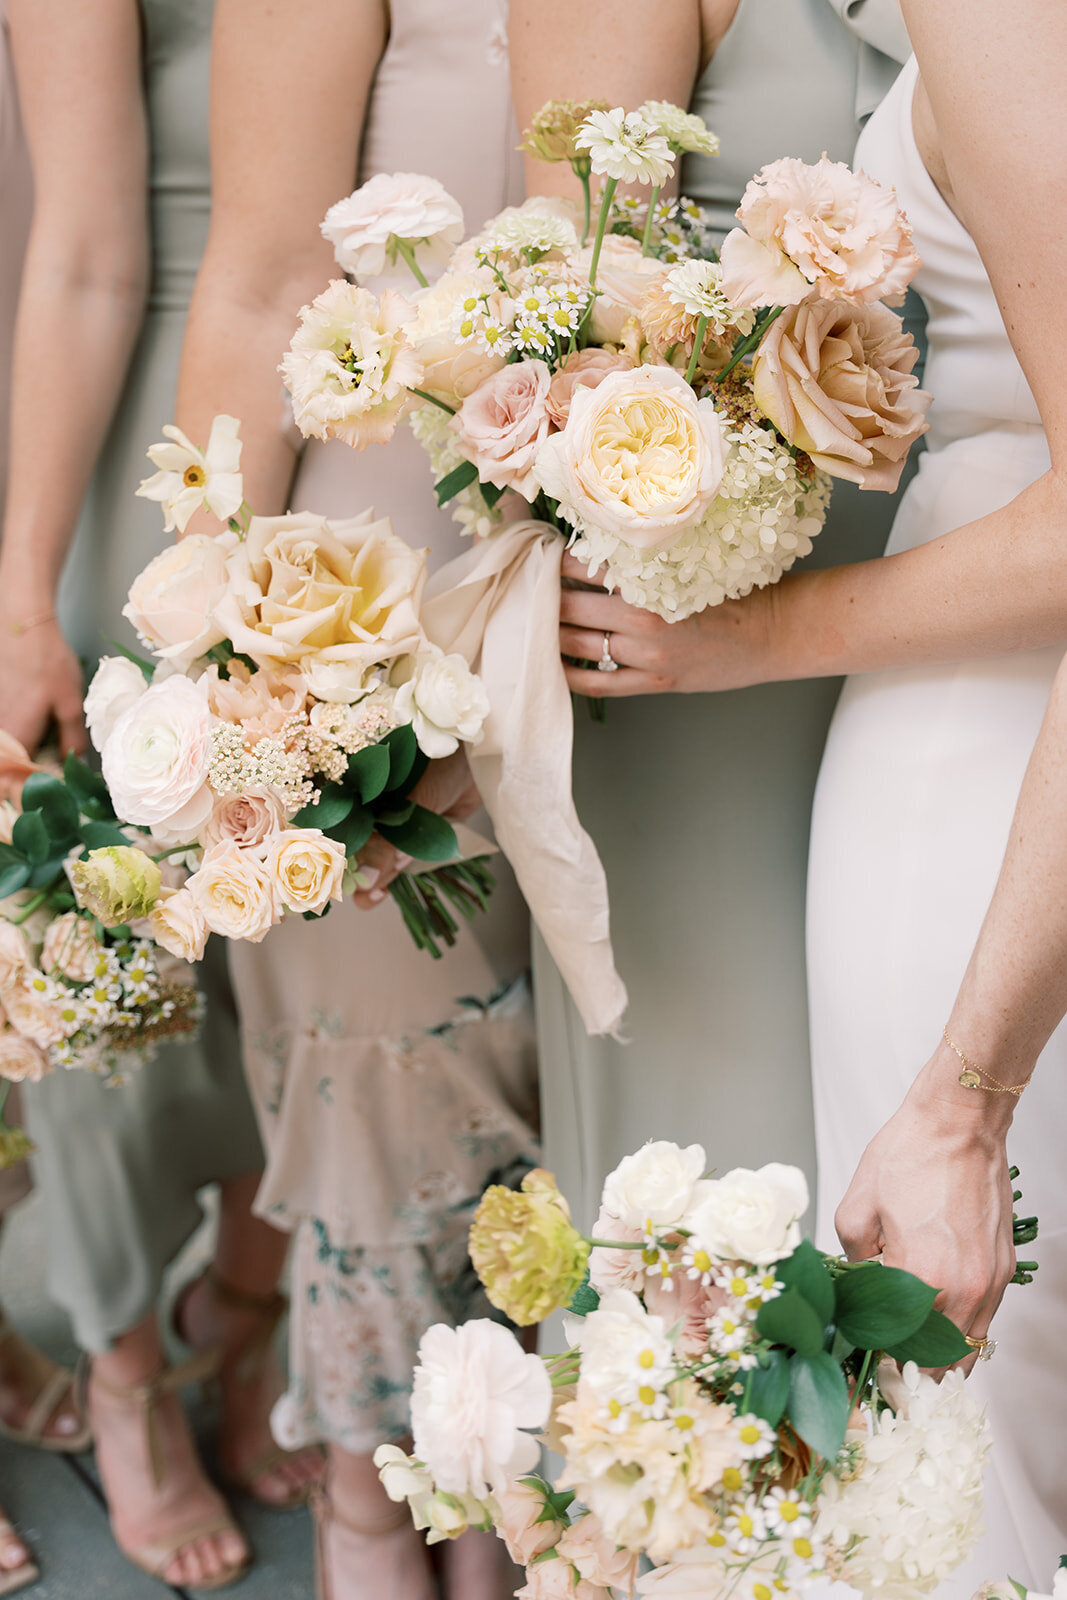 The bridal party holding bouquets with peach and blush garden roses, ranunculus, daisies, white hydrangea, and lisianthus.